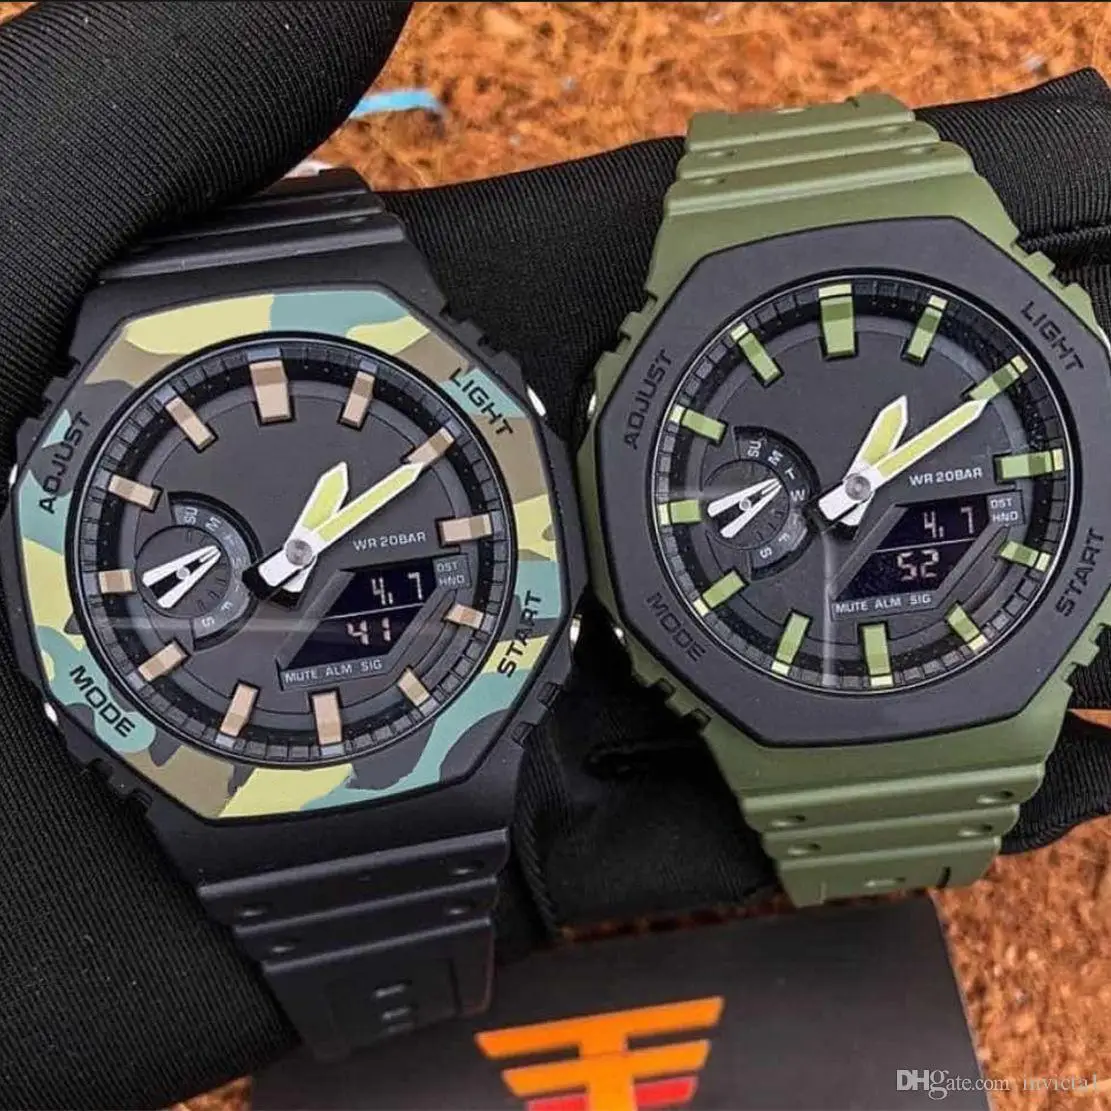 

New 2100 LED Dual Display Men's Sports Watch Royal Oak Electronic Digital Watch All functions can be operated High quality